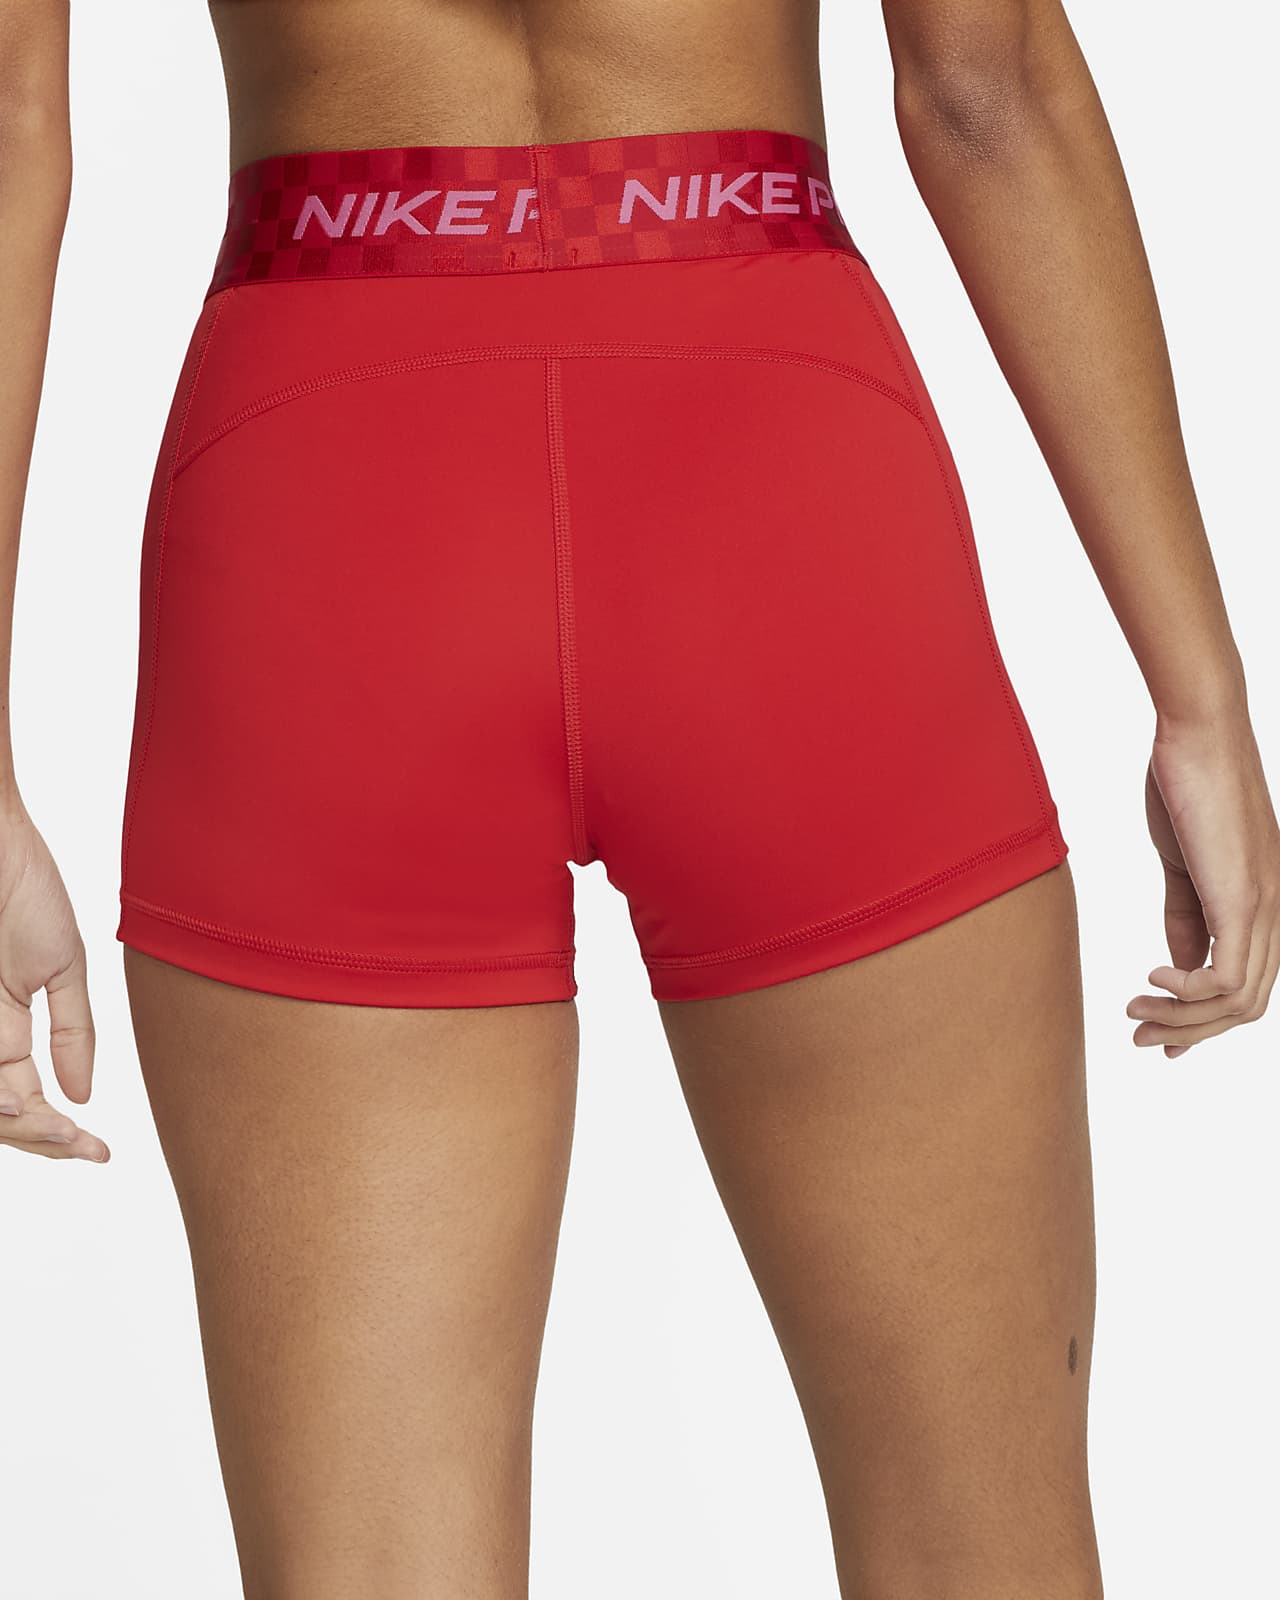 NIKE Nike Pro 365 Compression Short Women (Red)